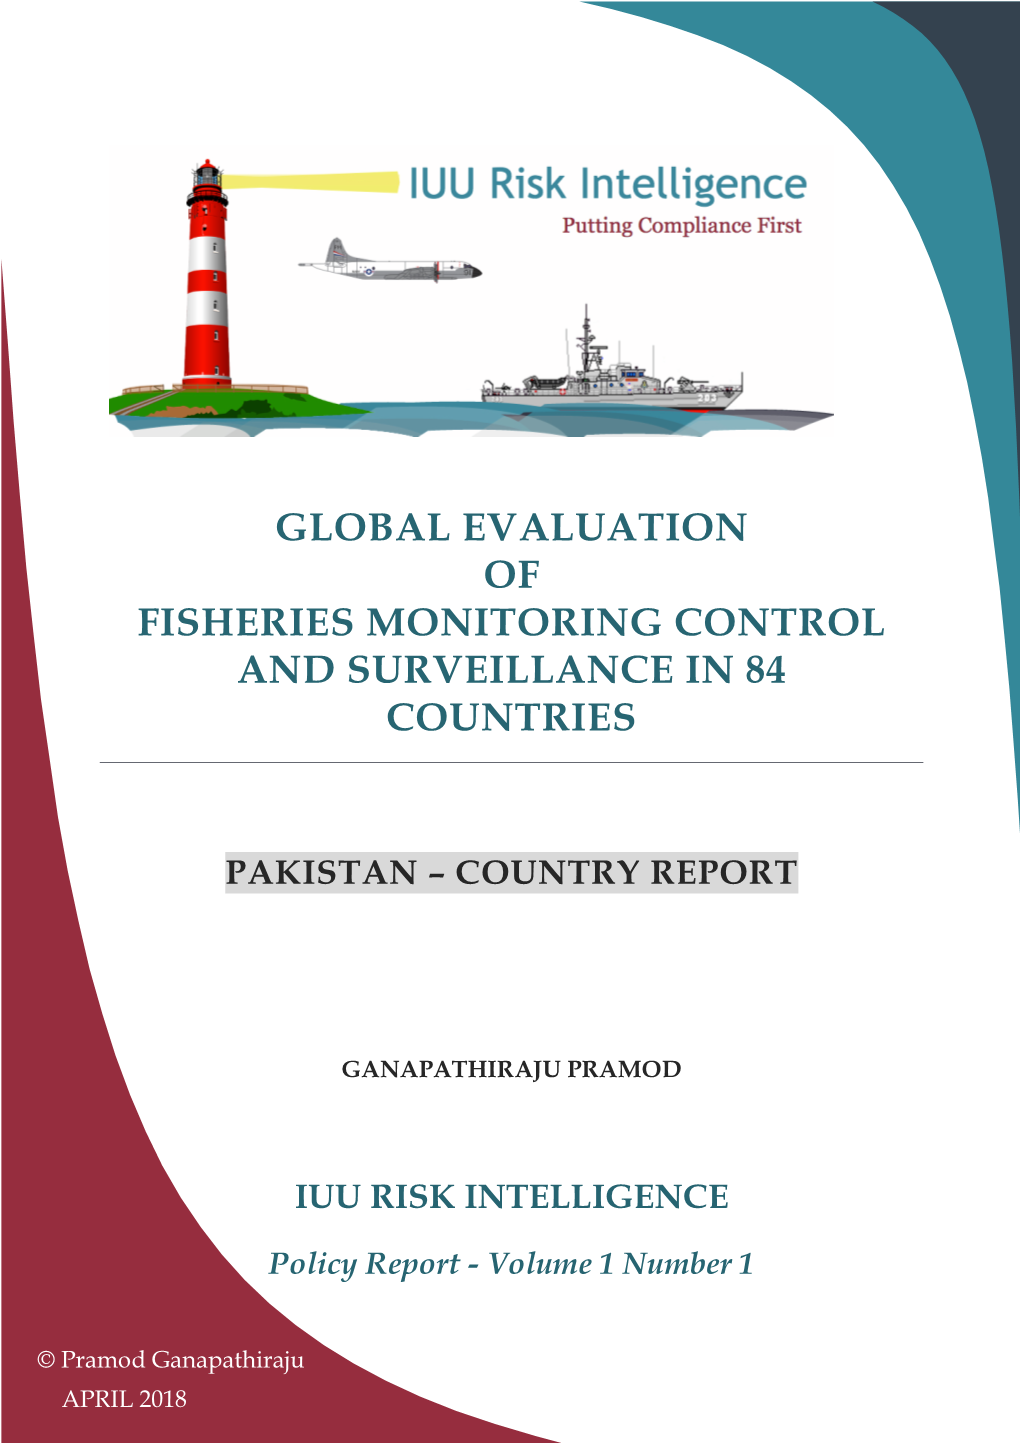 Global Evaluation of Fisheries Monitoring Control and Surveillance in 84 Countries